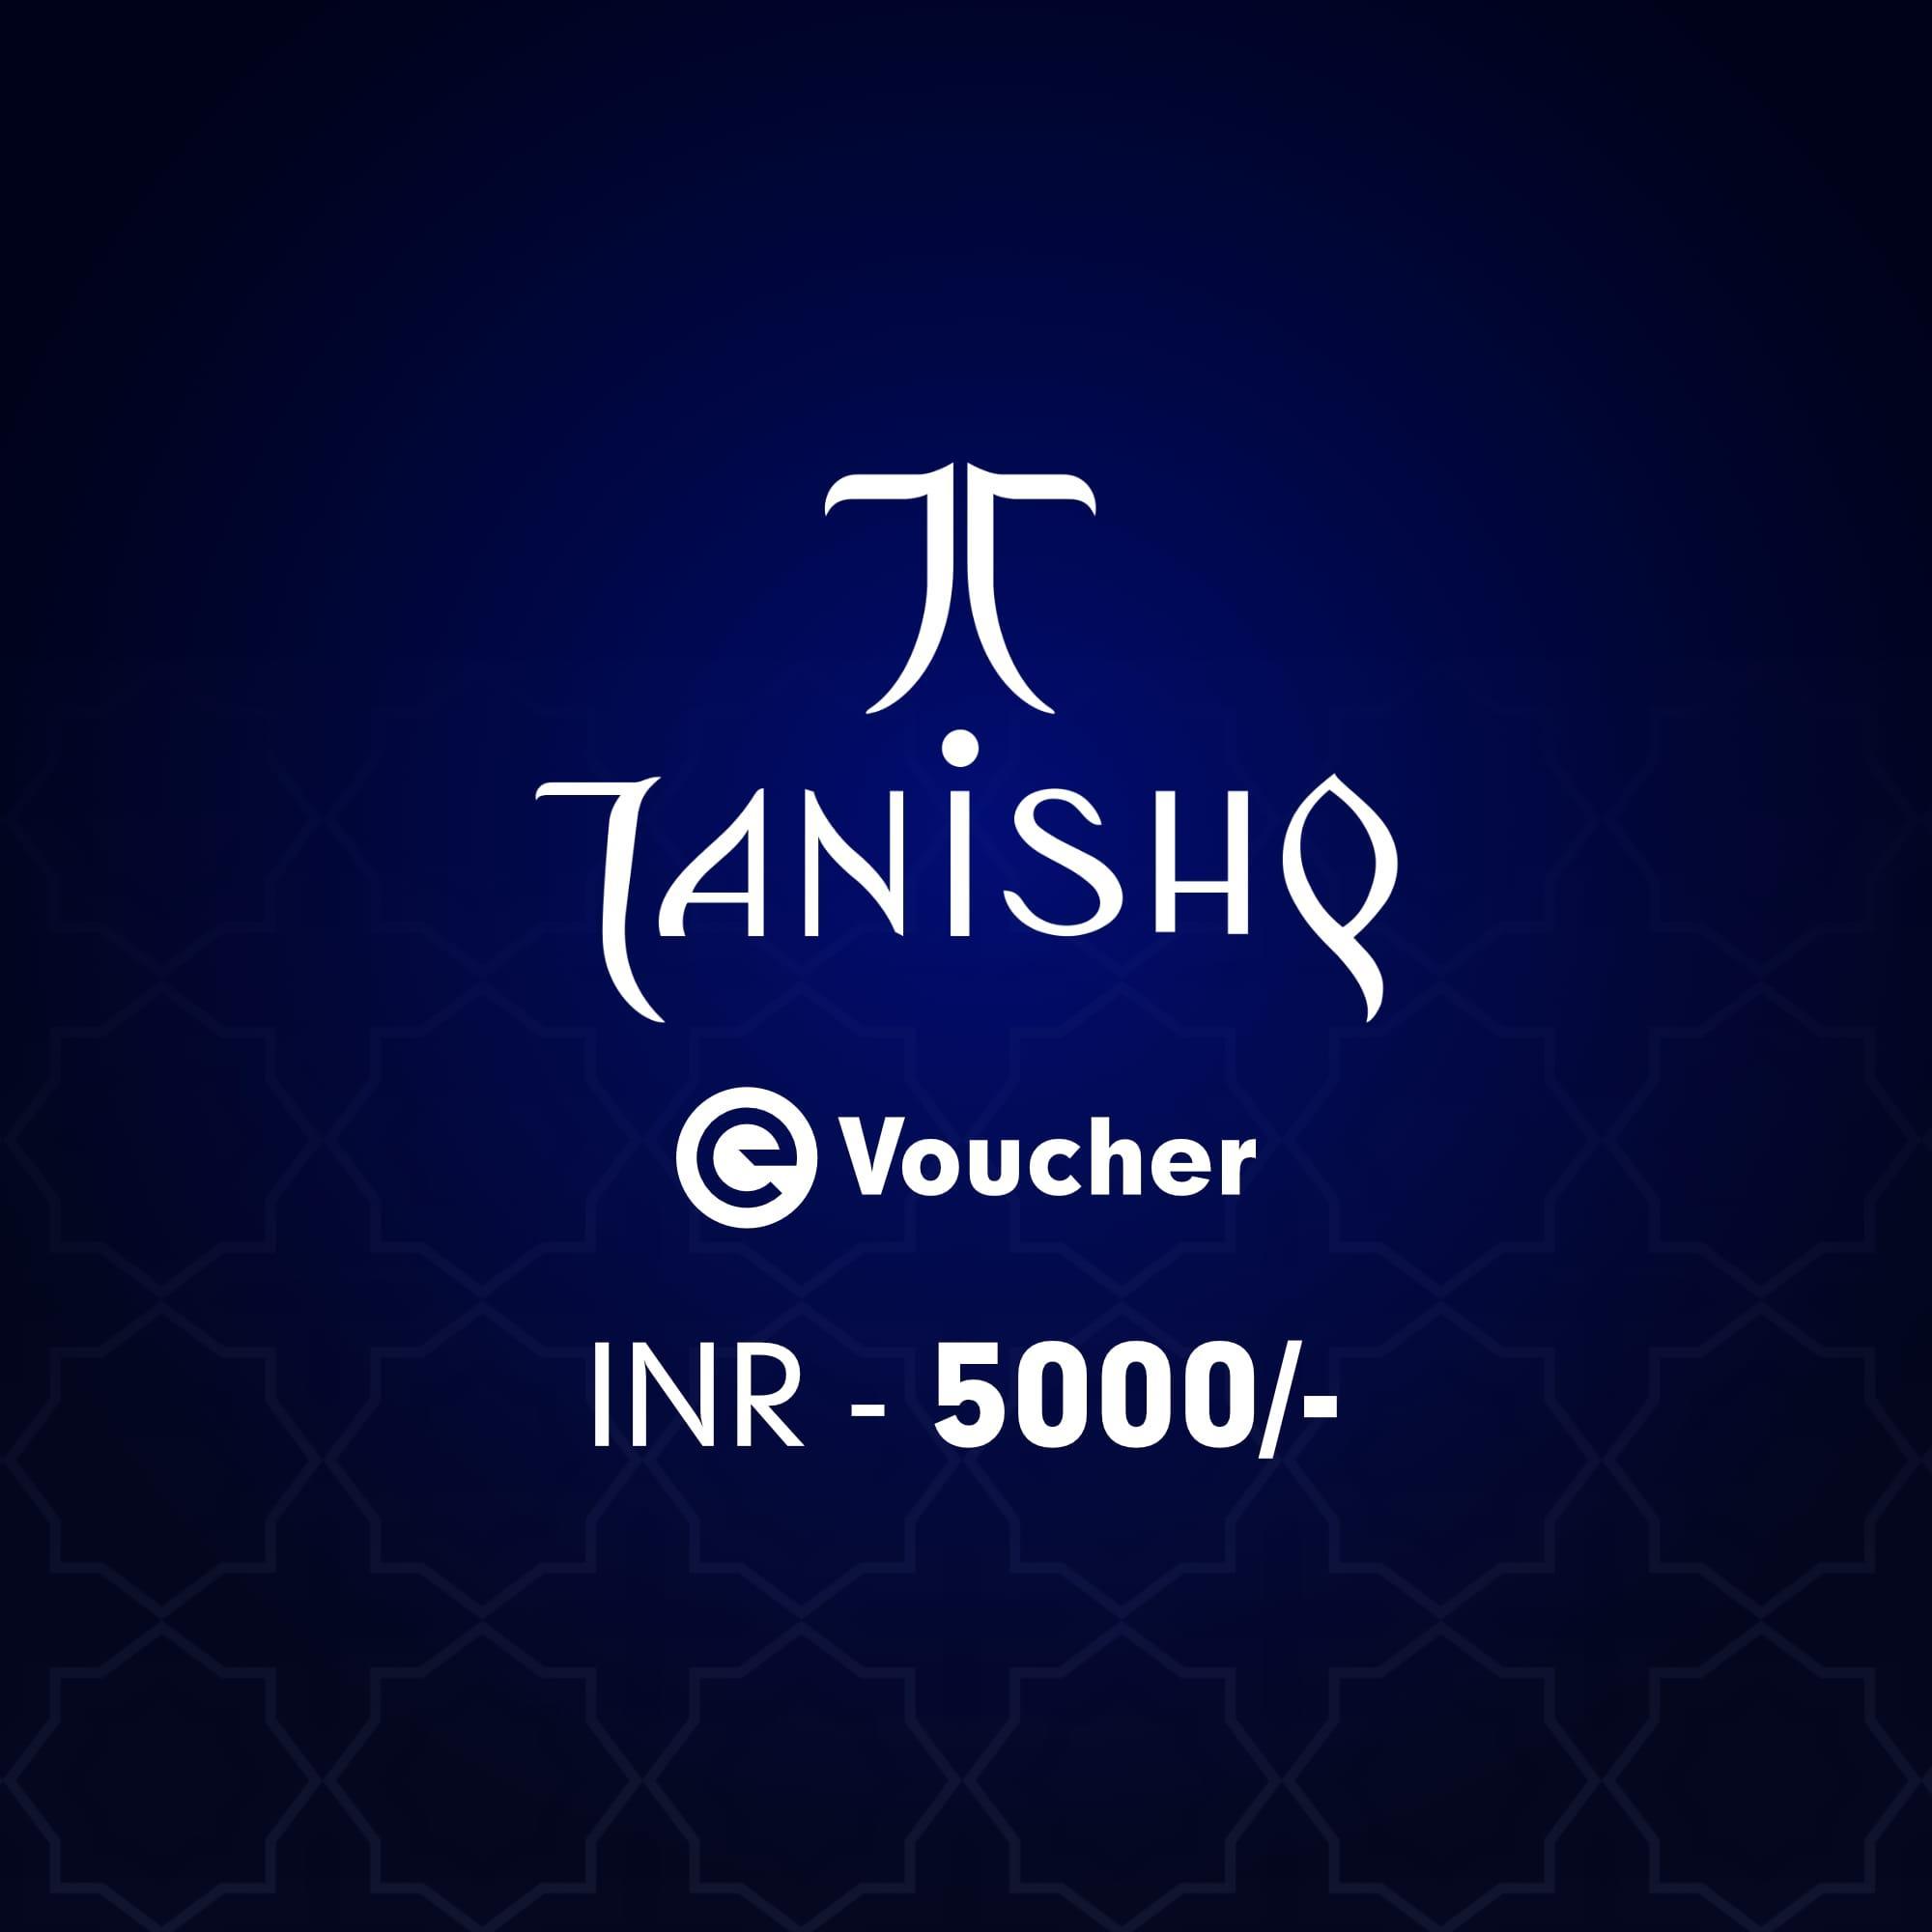 Tanishq Gift Card Rs 1000 GiftSend Experiences and Gift Cards Gifts  Online M11047297 IGPcom